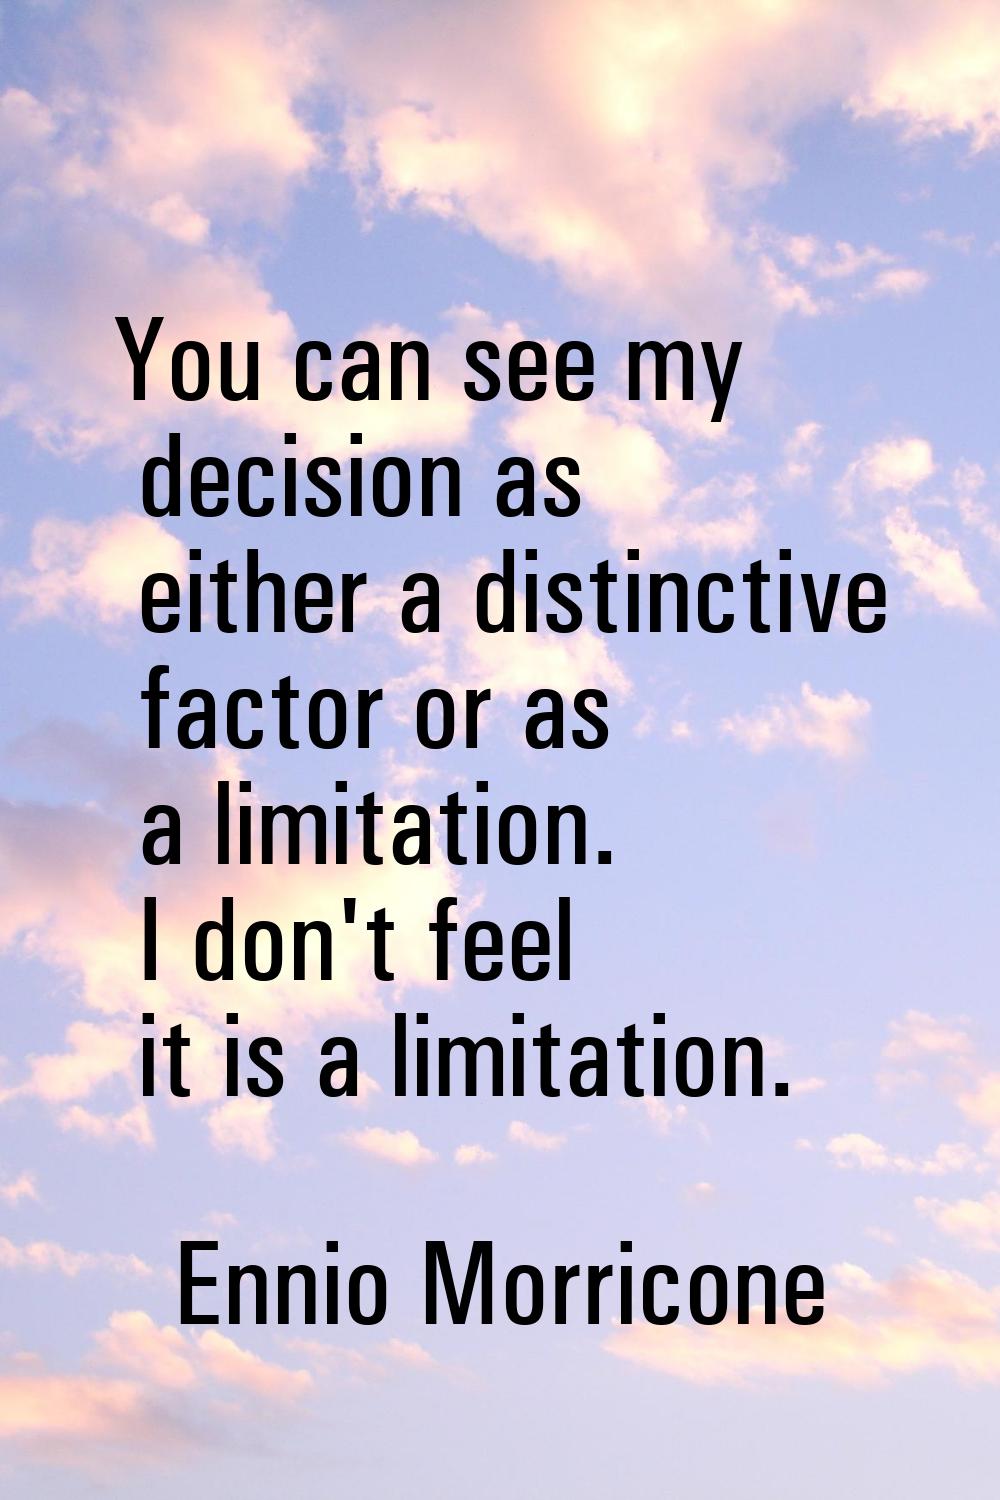 You can see my decision as either a distinctive factor or as a limitation. I don't feel it is a lim